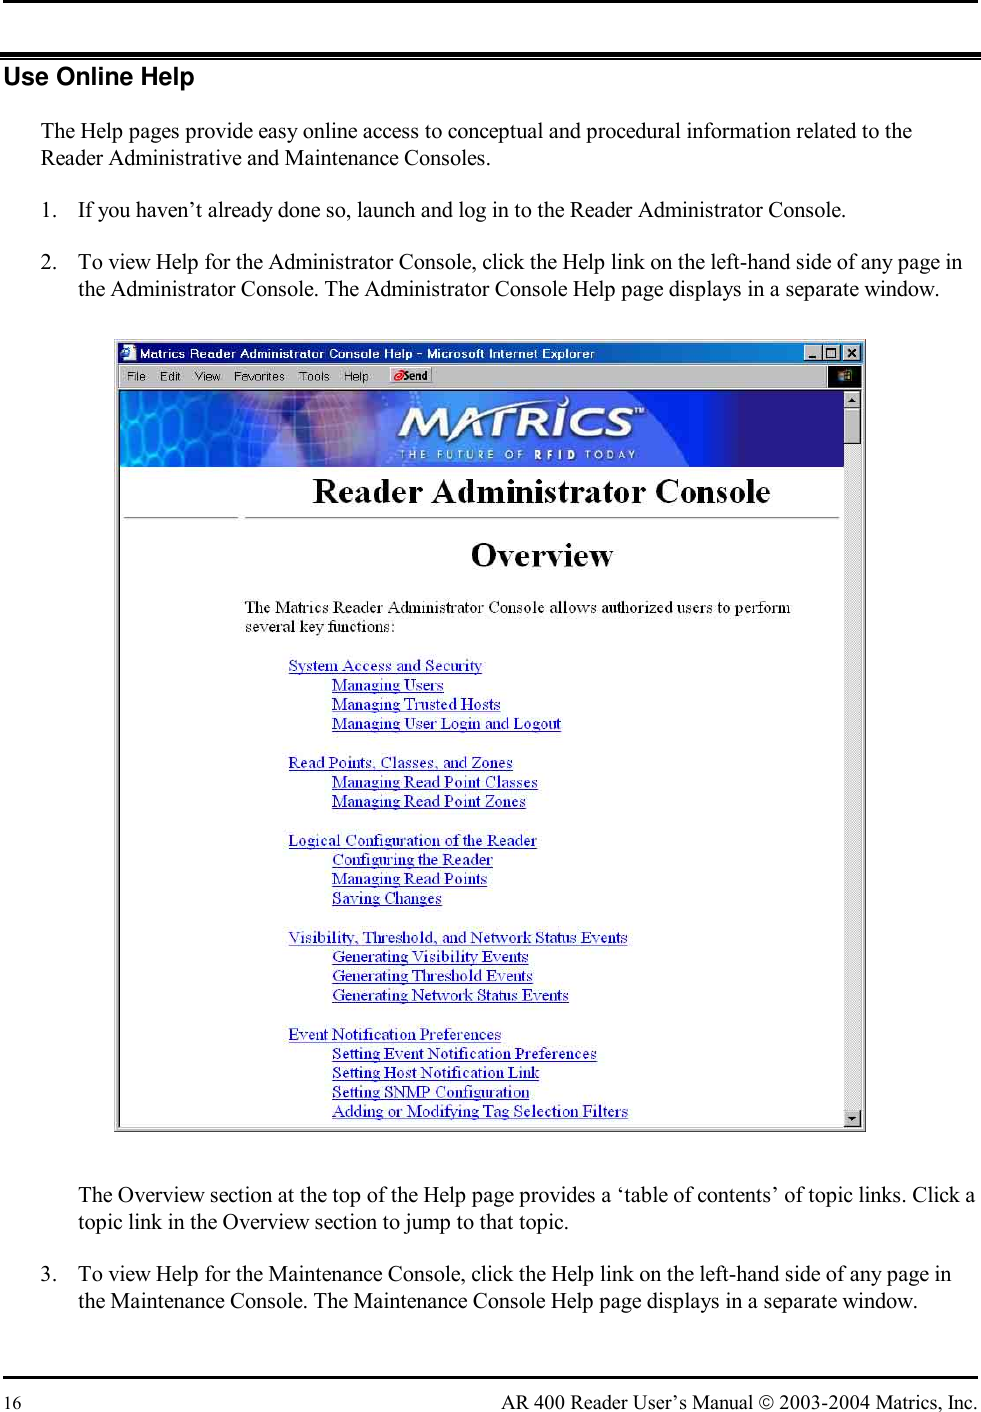  16  AR 400 Reader User’s Manual  2003-2004 Matrics, Inc. Use Online Help The Help pages provide easy online access to conceptual and procedural information related to the Reader Administrative and Maintenance Consoles. 1.  If you haven’t already done so, launch and log in to the Reader Administrator Console. 2.  To view Help for the Administrator Console, click the Help link on the left-hand side of any page in the Administrator Console. The Administrator Console Help page displays in a separate window.  The Overview section at the top of the Help page provides a ‘table of contents’ of topic links. Click a topic link in the Overview section to jump to that topic. 3.  To view Help for the Maintenance Console, click the Help link on the left-hand side of any page in the Maintenance Console. The Maintenance Console Help page displays in a separate window. 